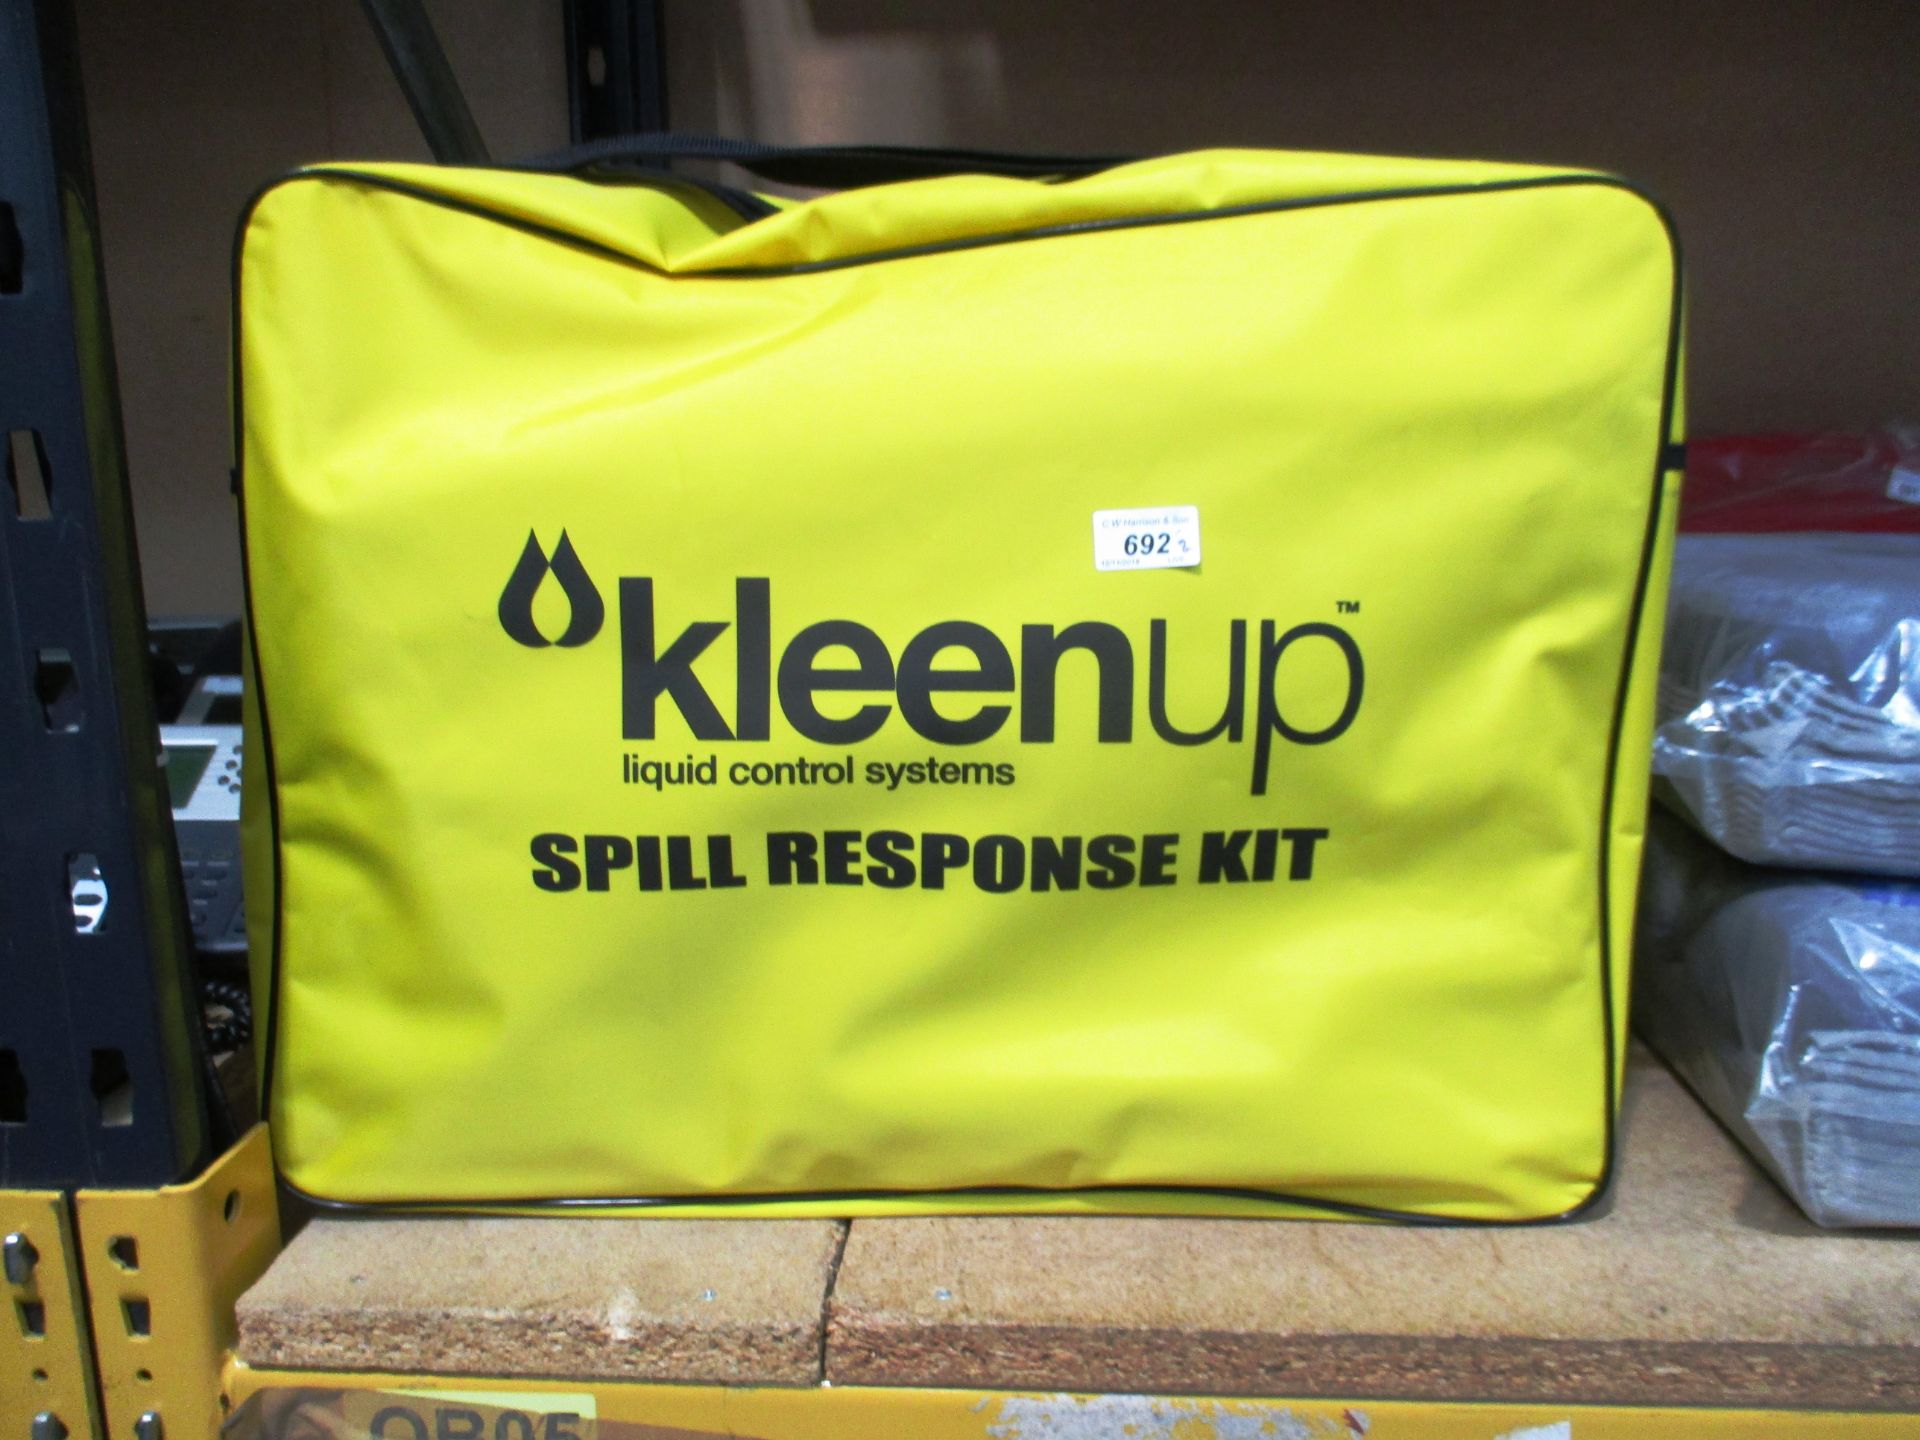 2 x Kleen Up liquid control systems spill response kits